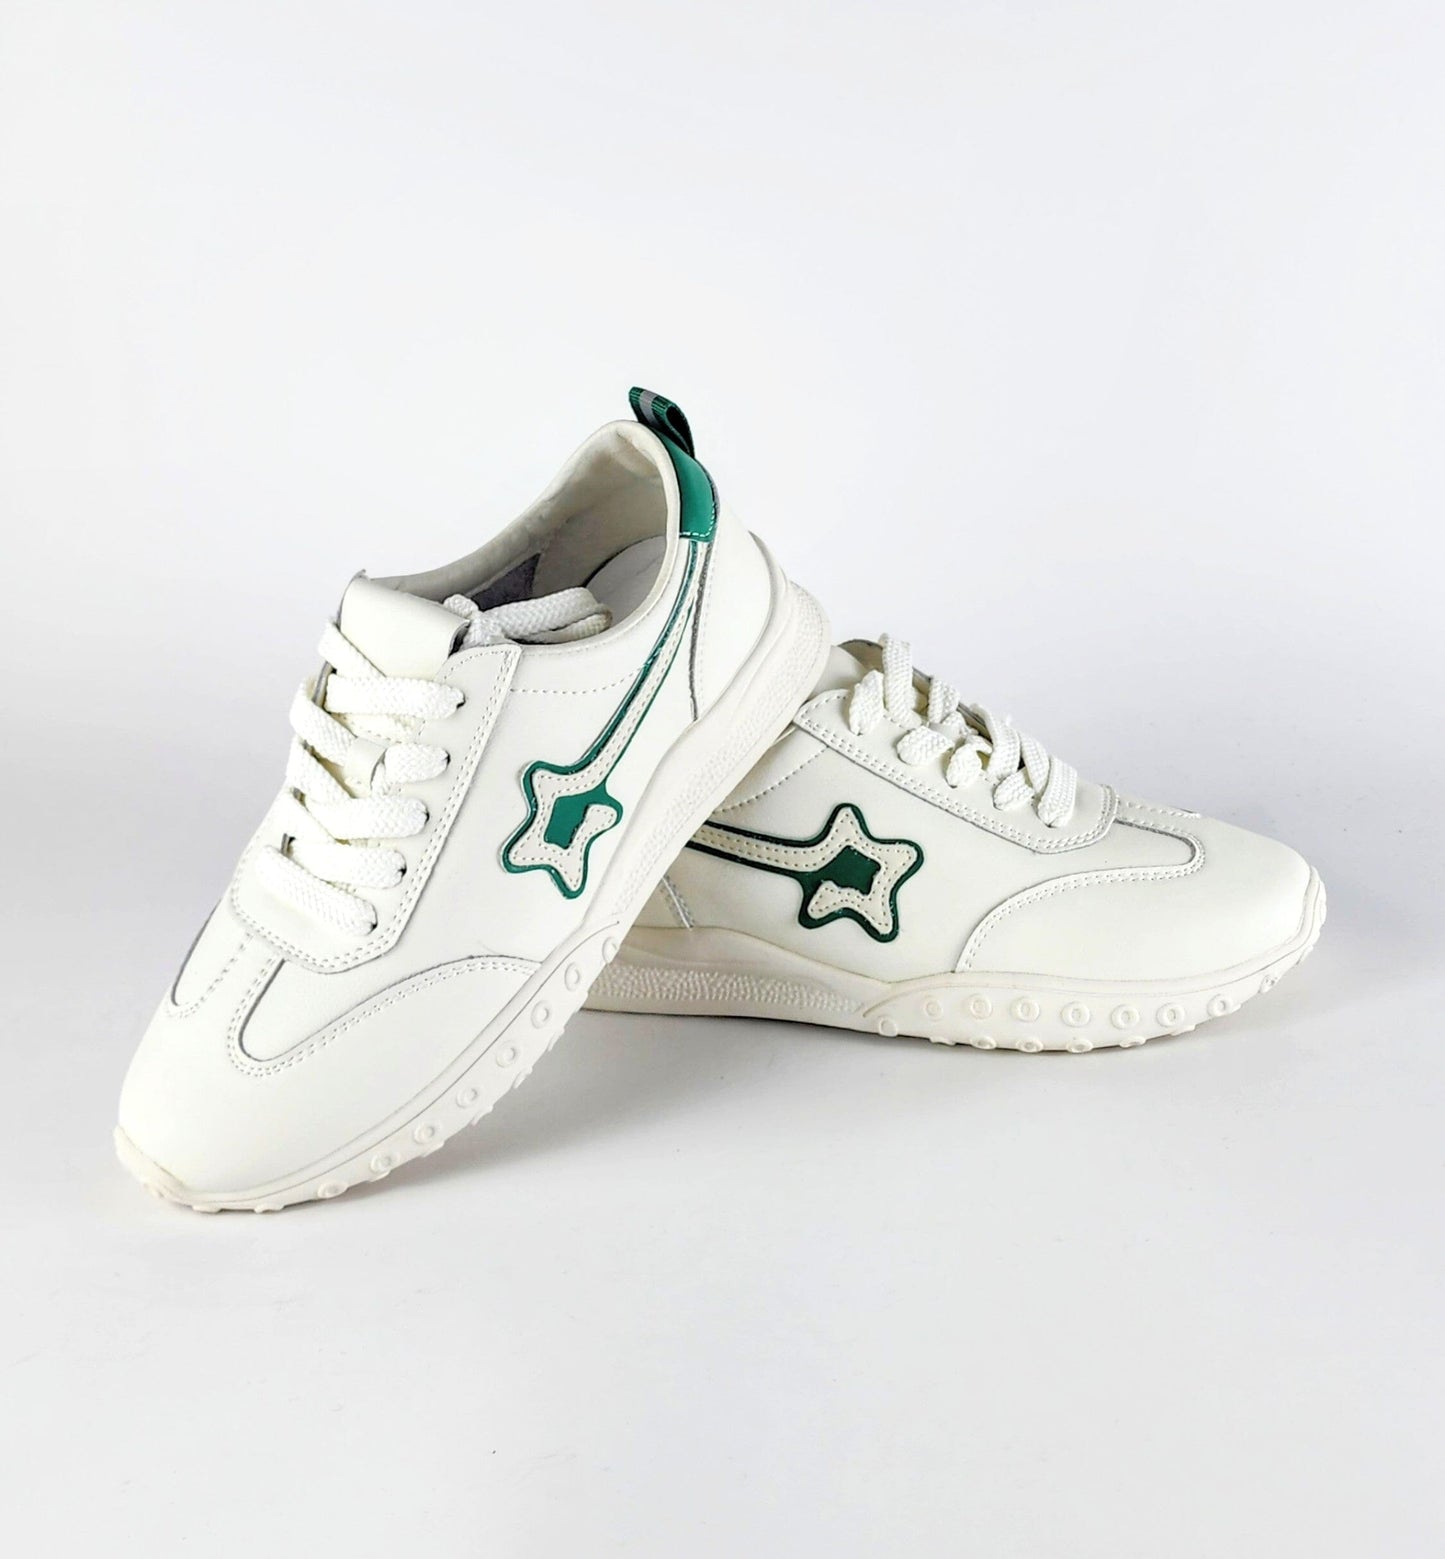 SS23009 White leather sneakers with star and flexible sole sneakers Sam Star Shoes Green 36 